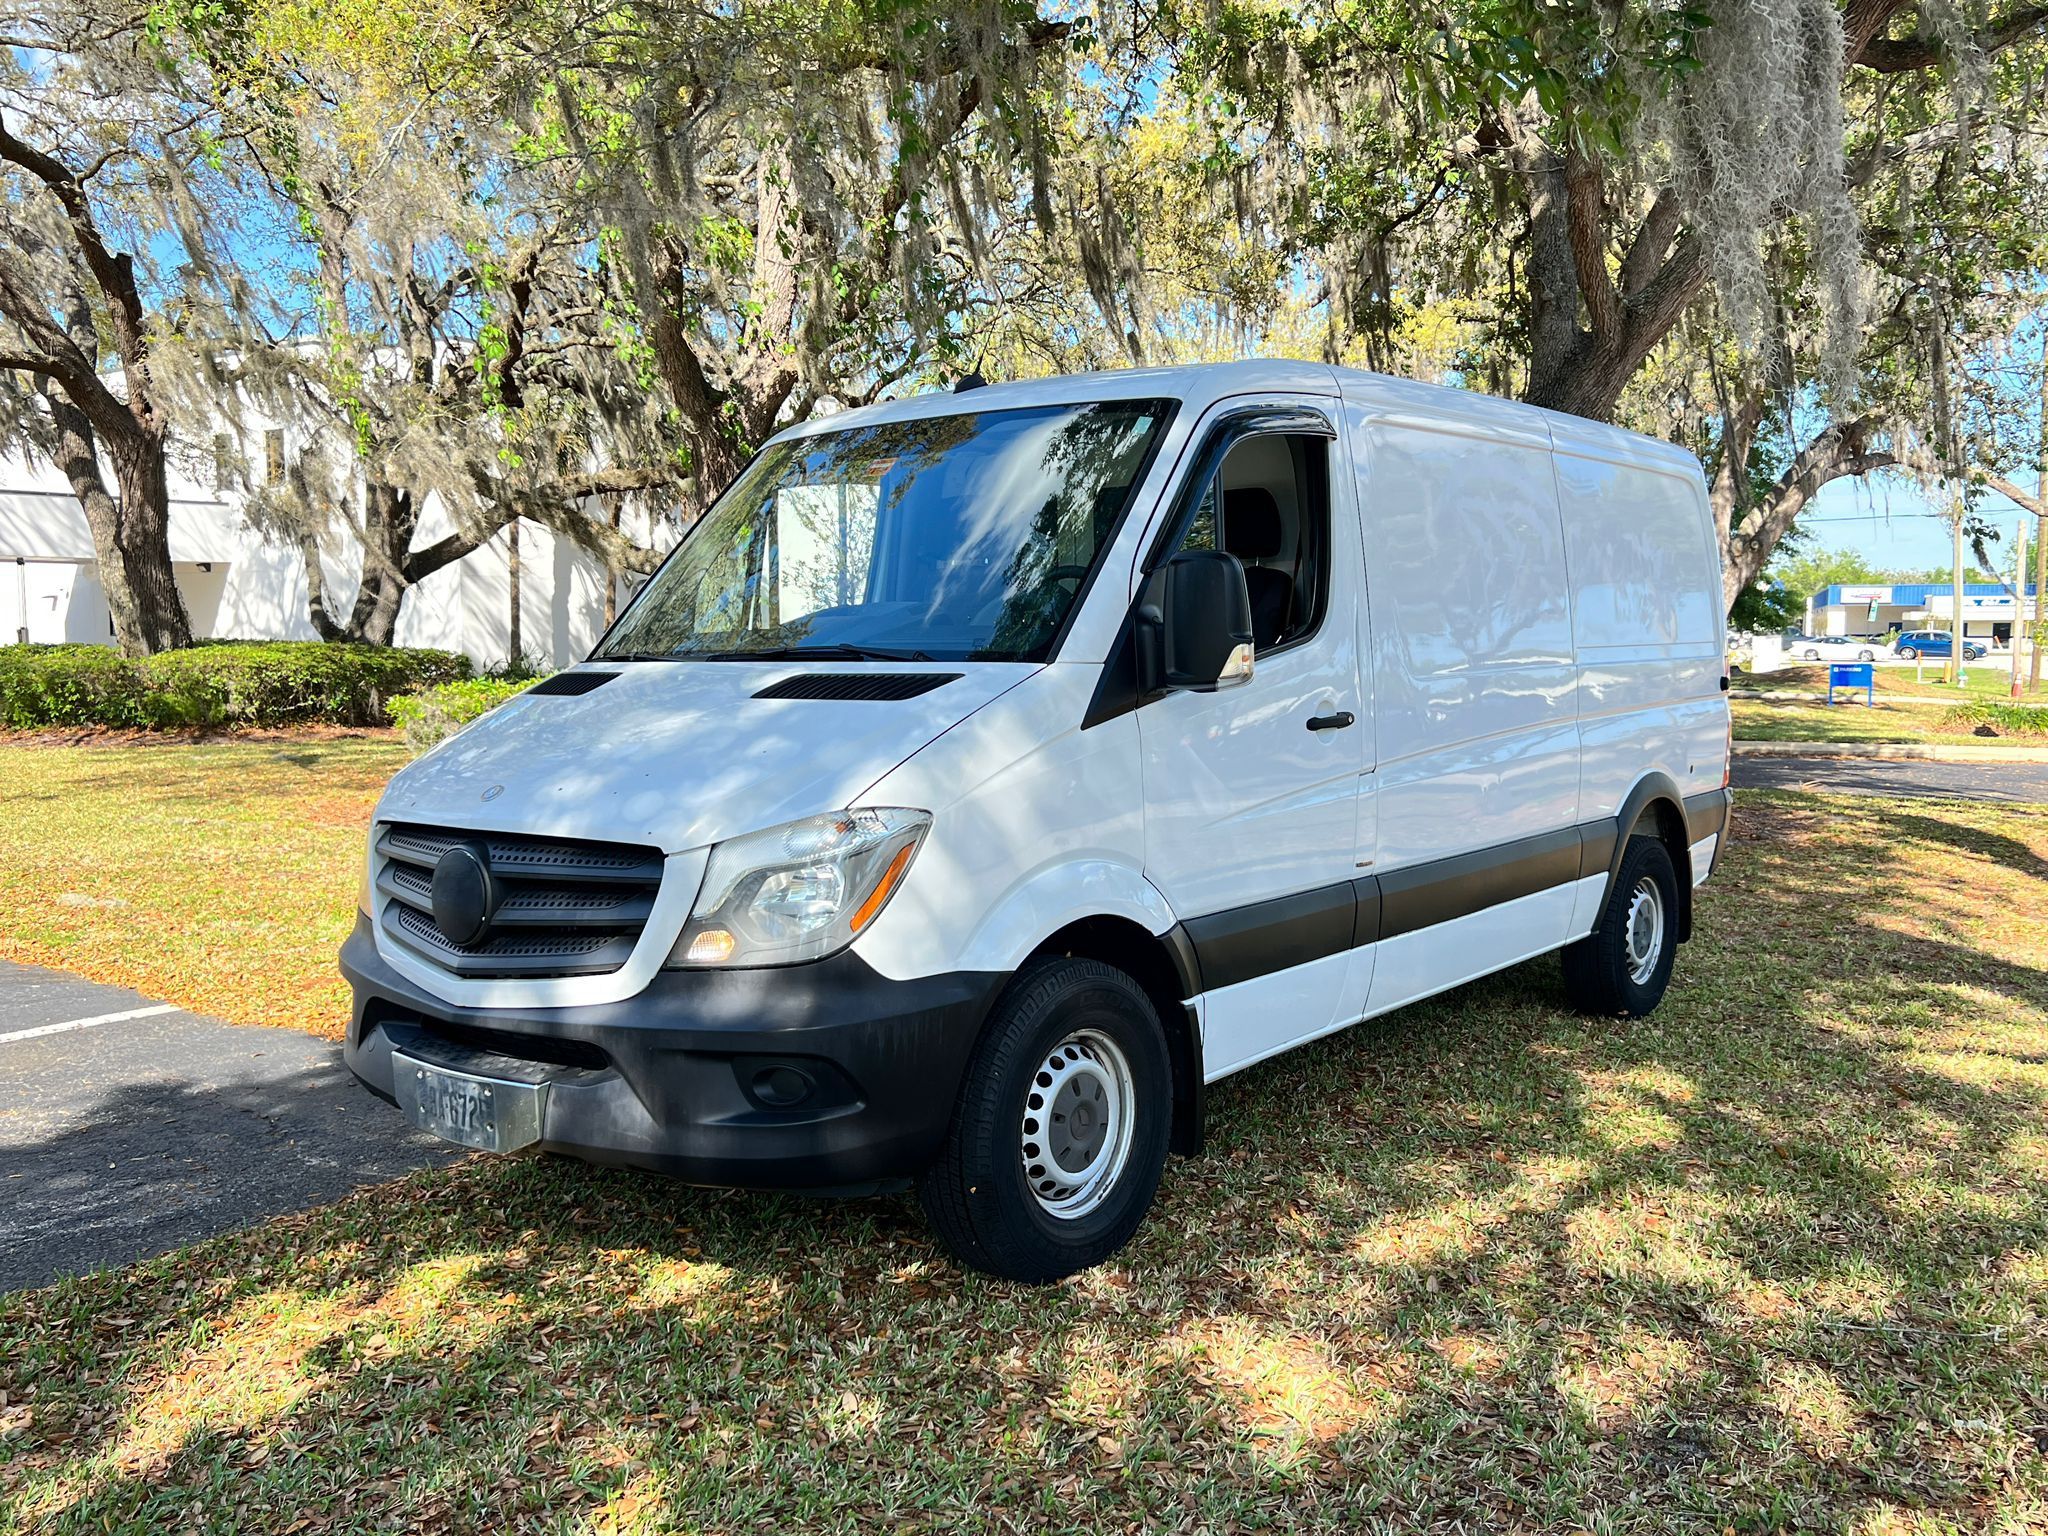 For Sale: 2015 Dodge Sprinter Van - Reliable, Spacious, Ready for Action!**